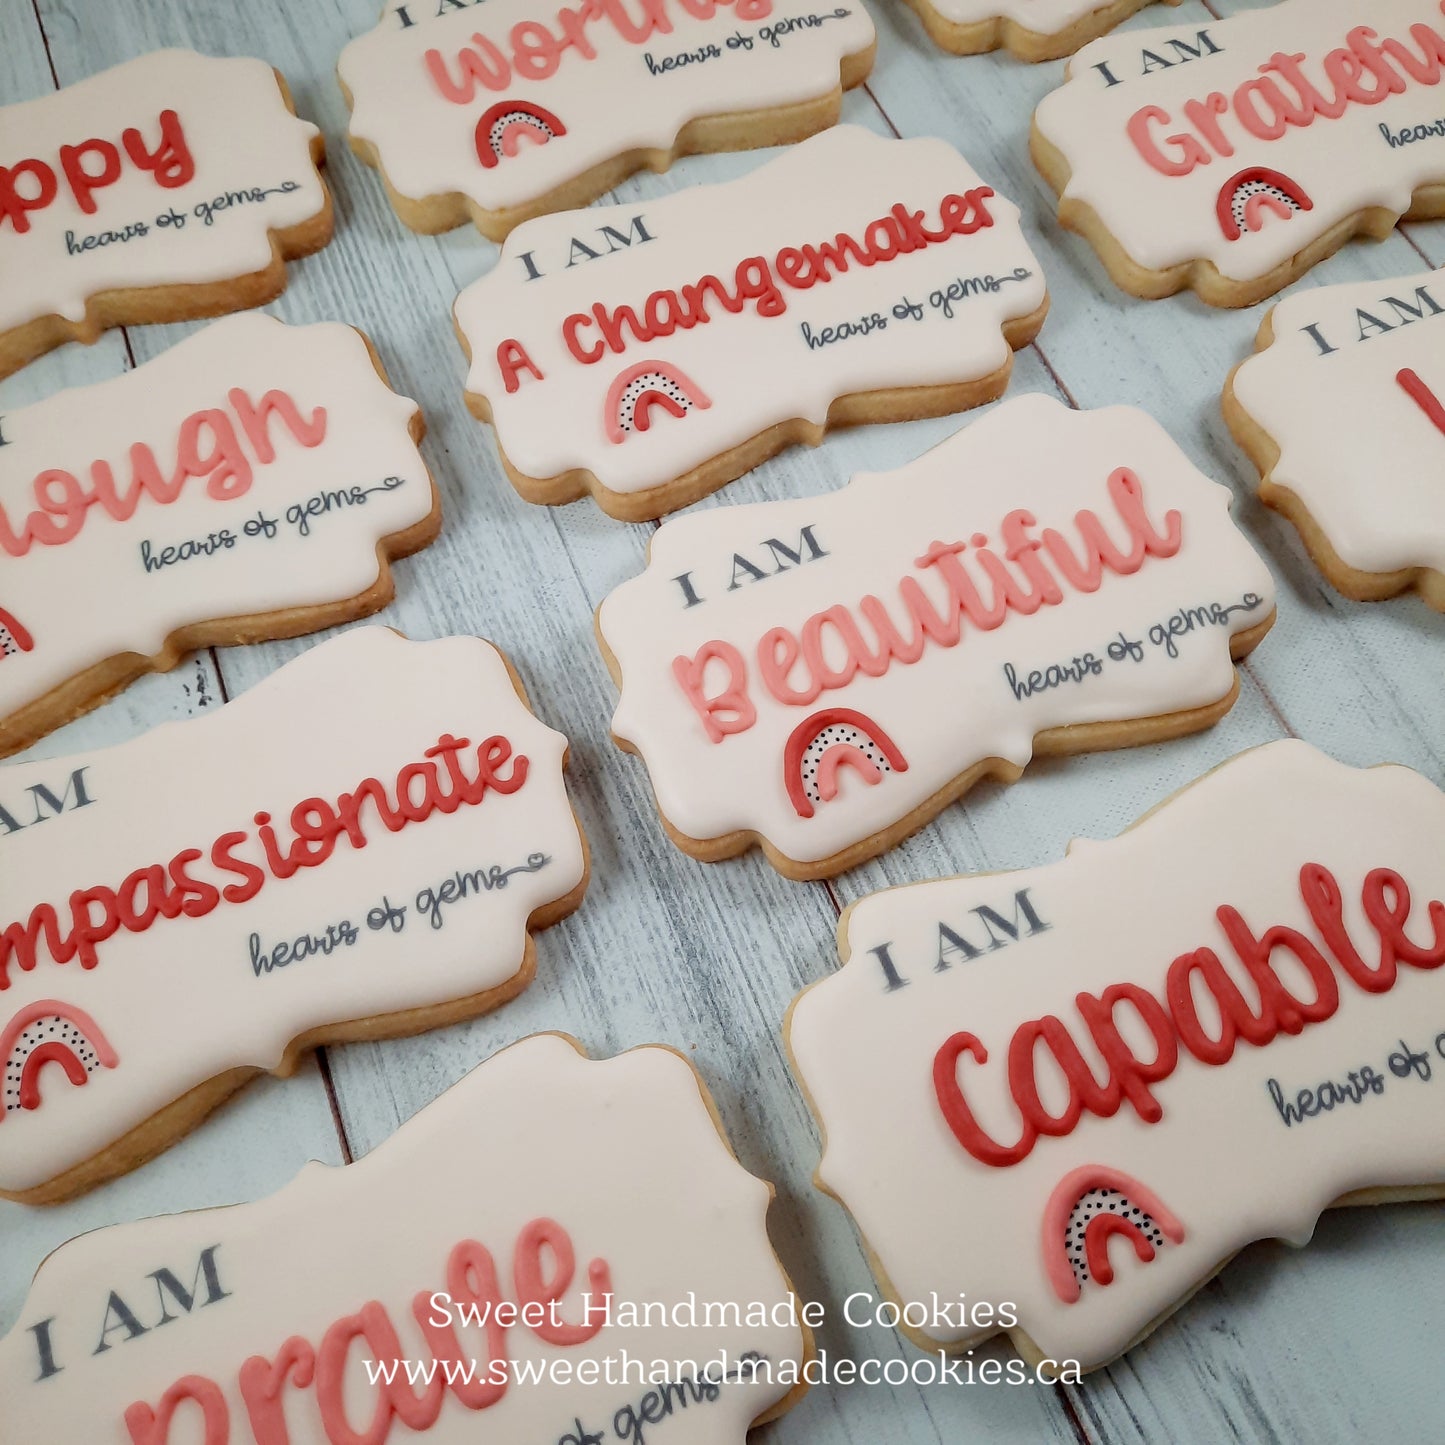 Affirmation Cookies